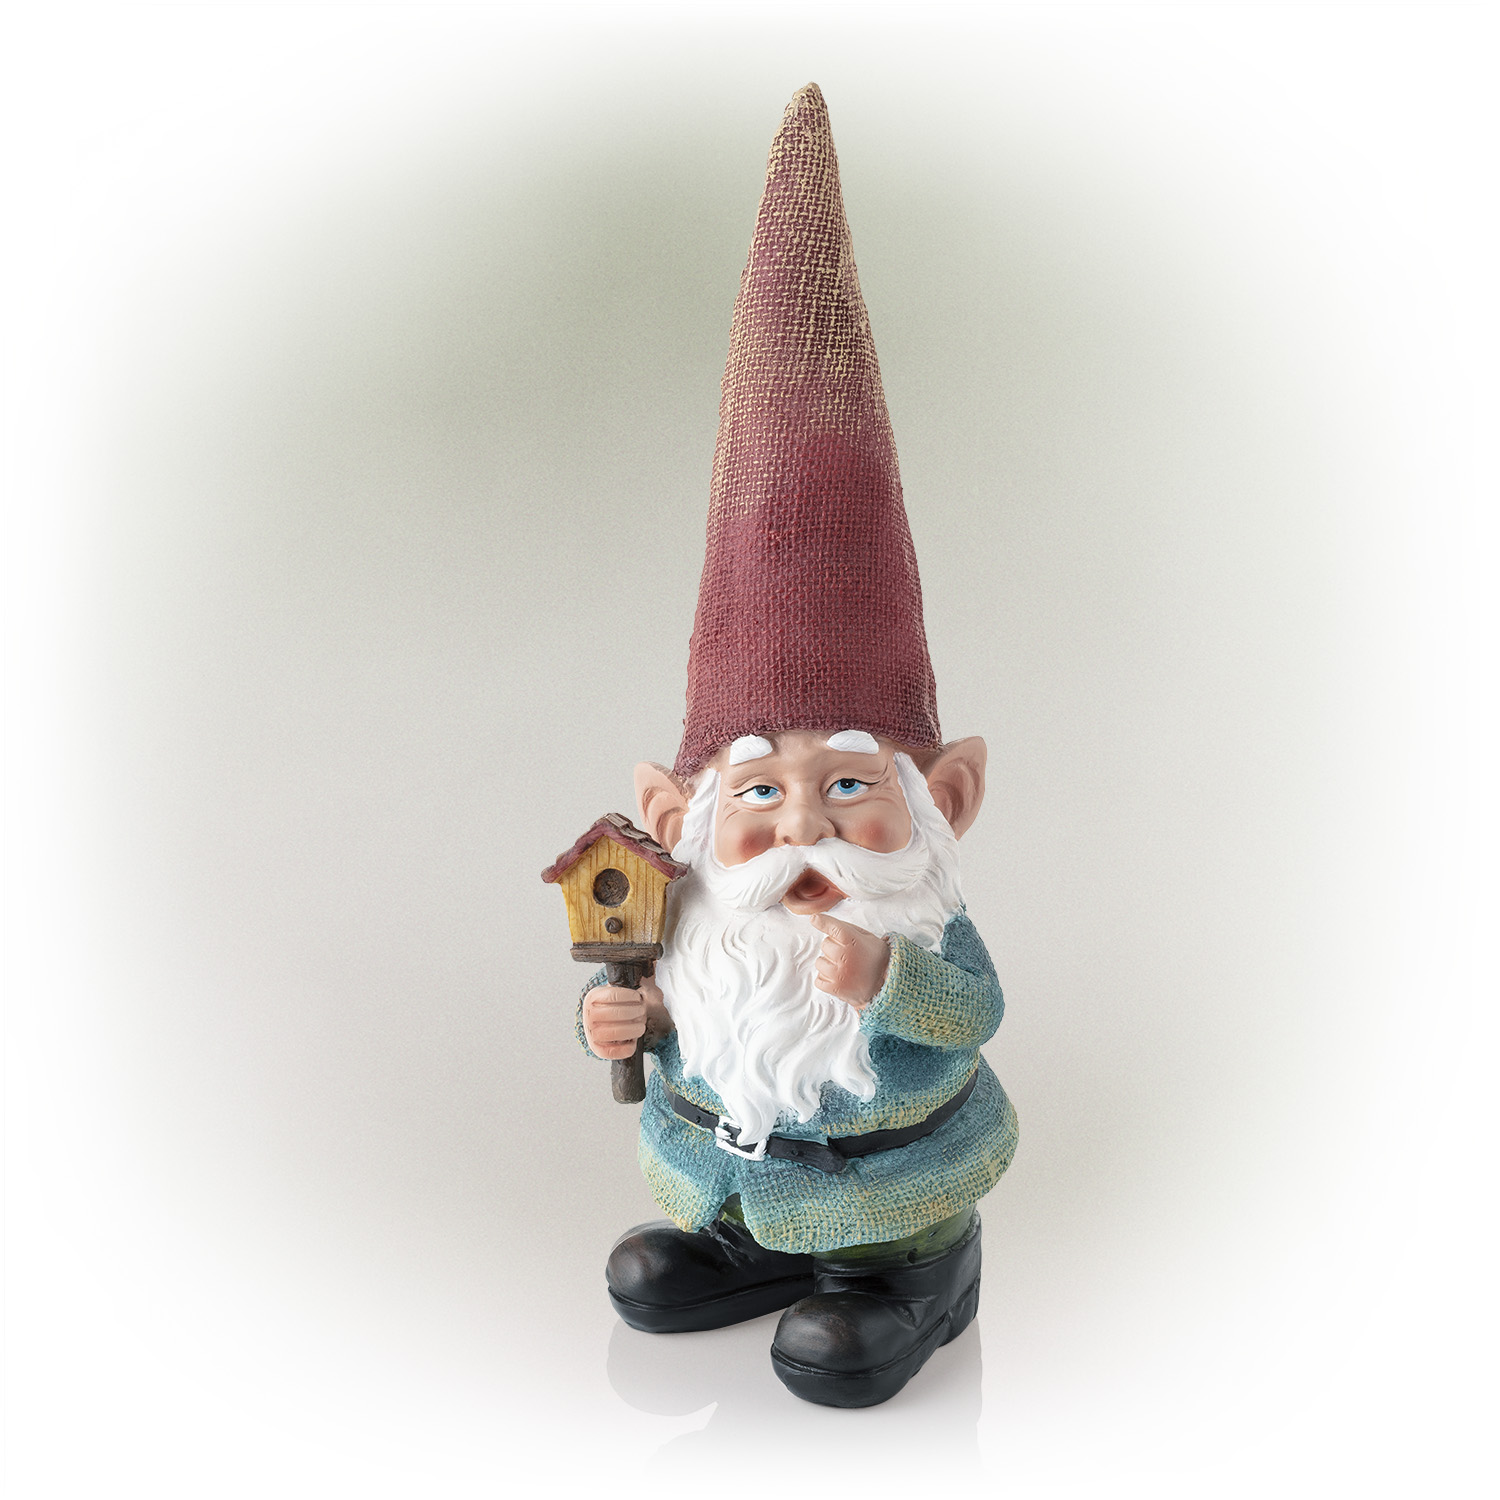 Alpine Corporation 15" Garden Gnome Holding Birdhouse Outdoor Statue, Red - image 3 of 12